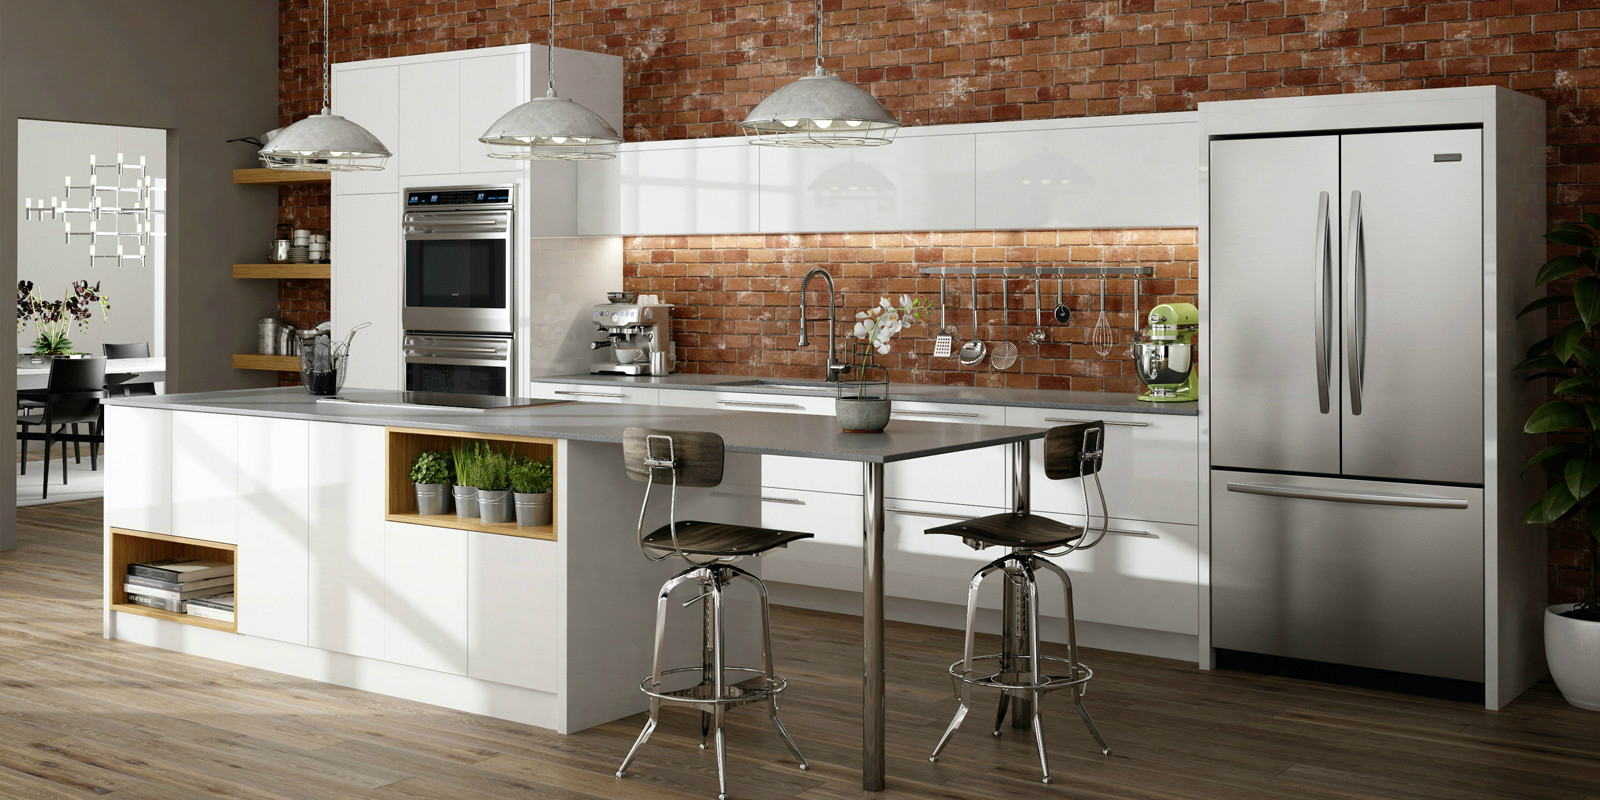 Latitude Cabinets At Lowes Modern Frameless Kitchen And Bath Cabinets